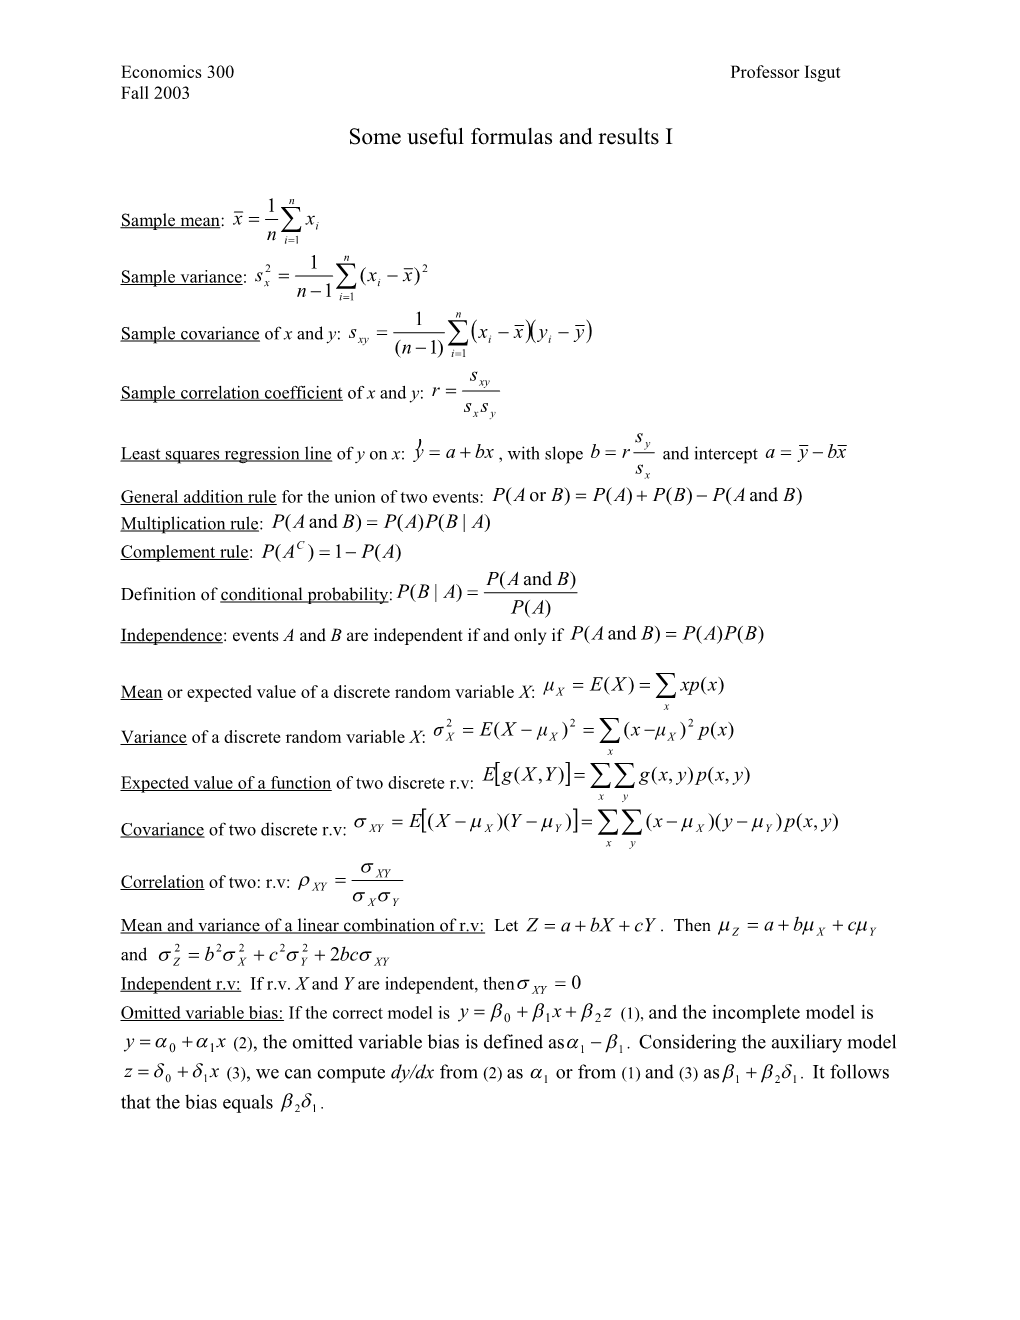 Some Useful Formulas and Results I